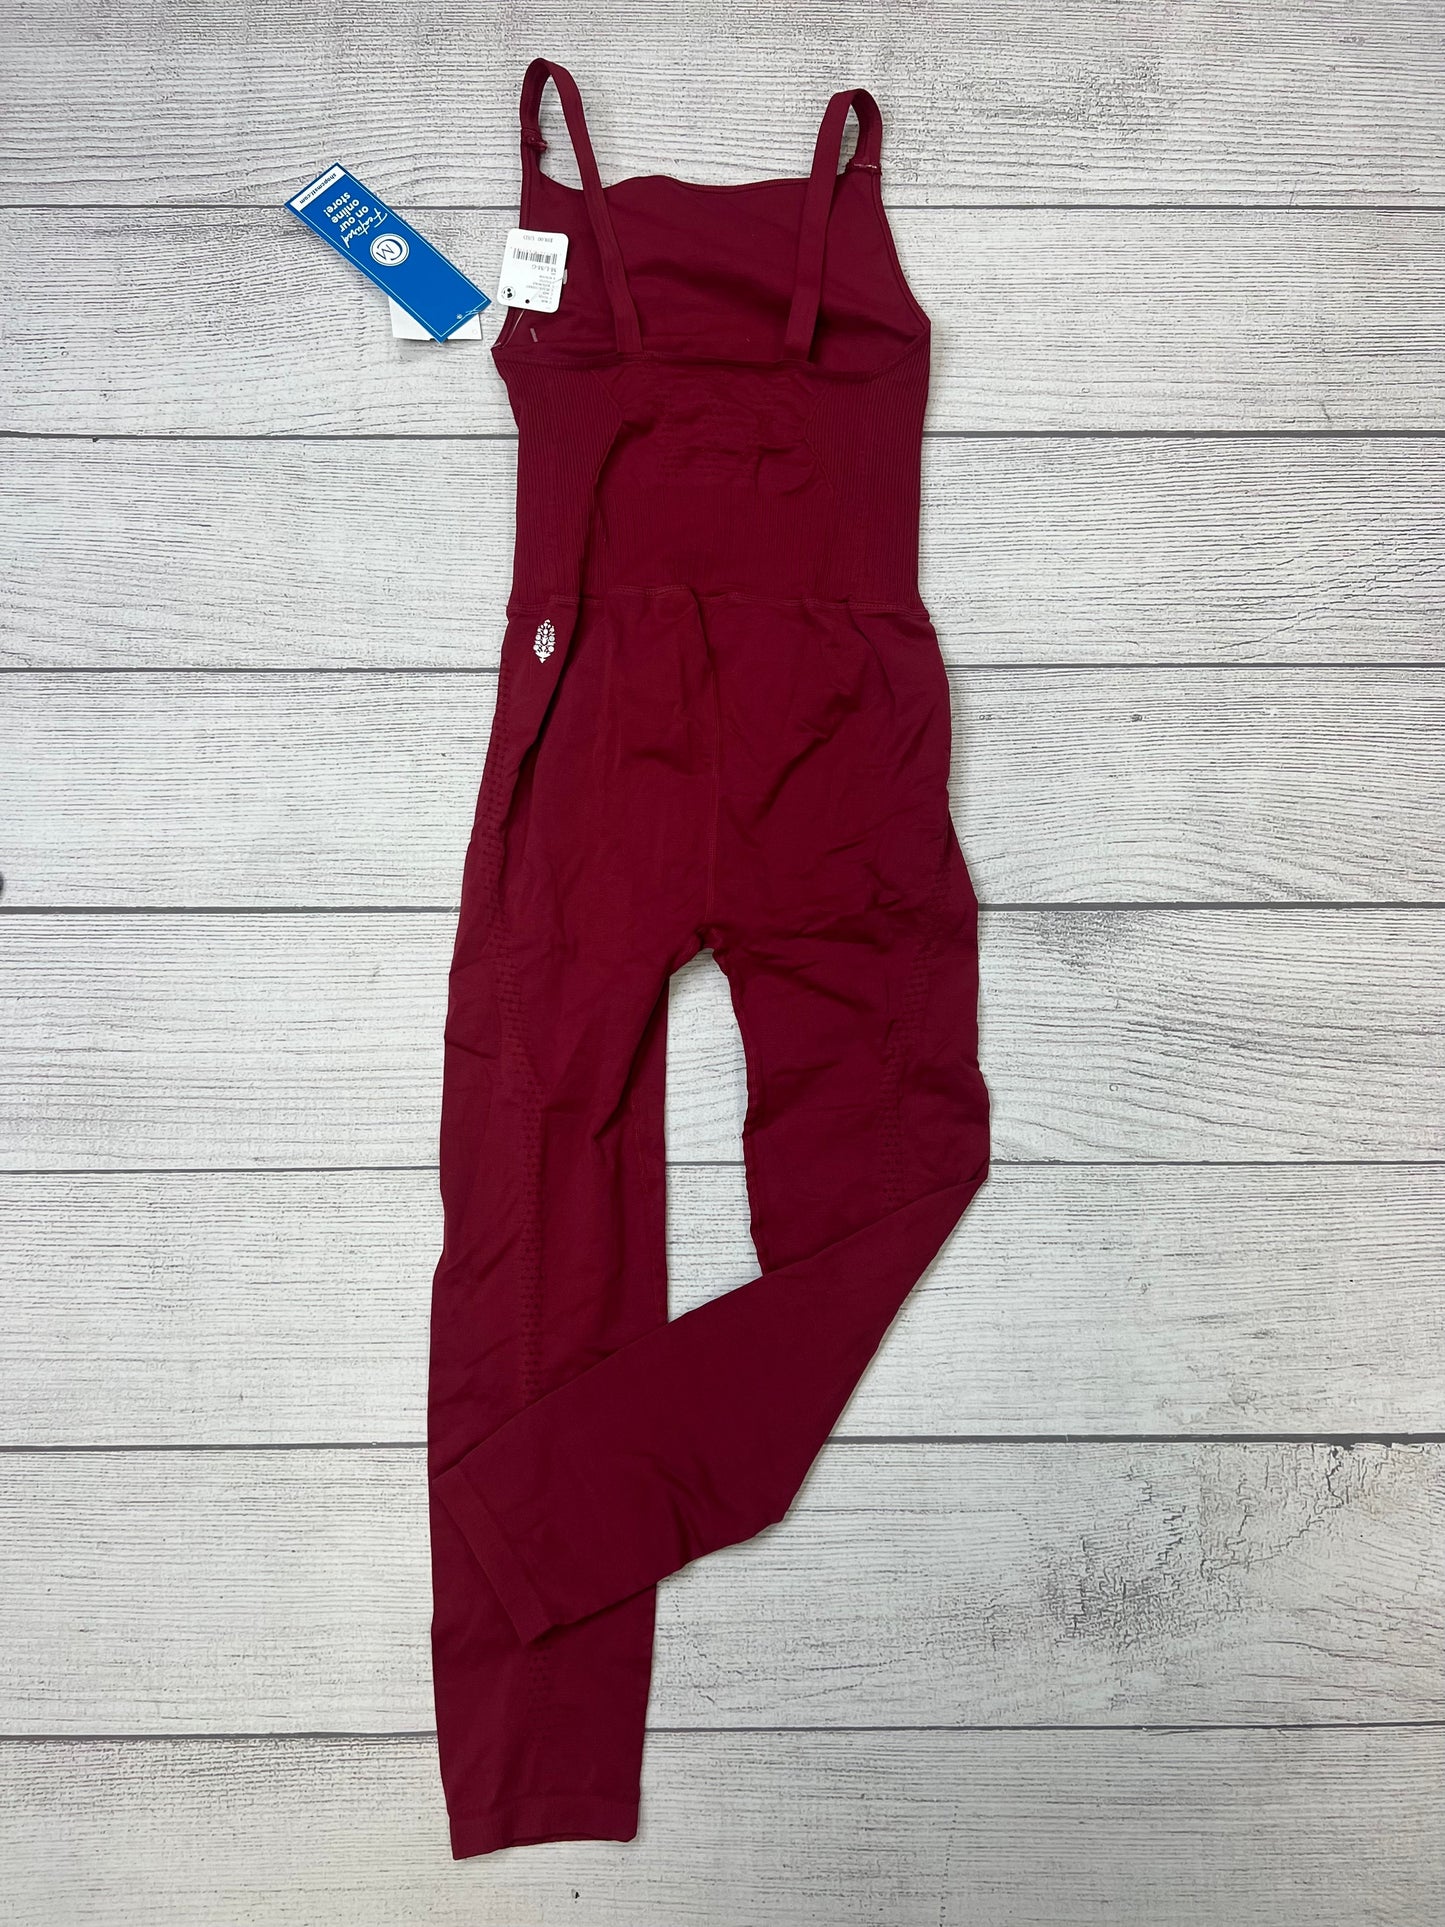 Red Jumpsuit Free People, Size M